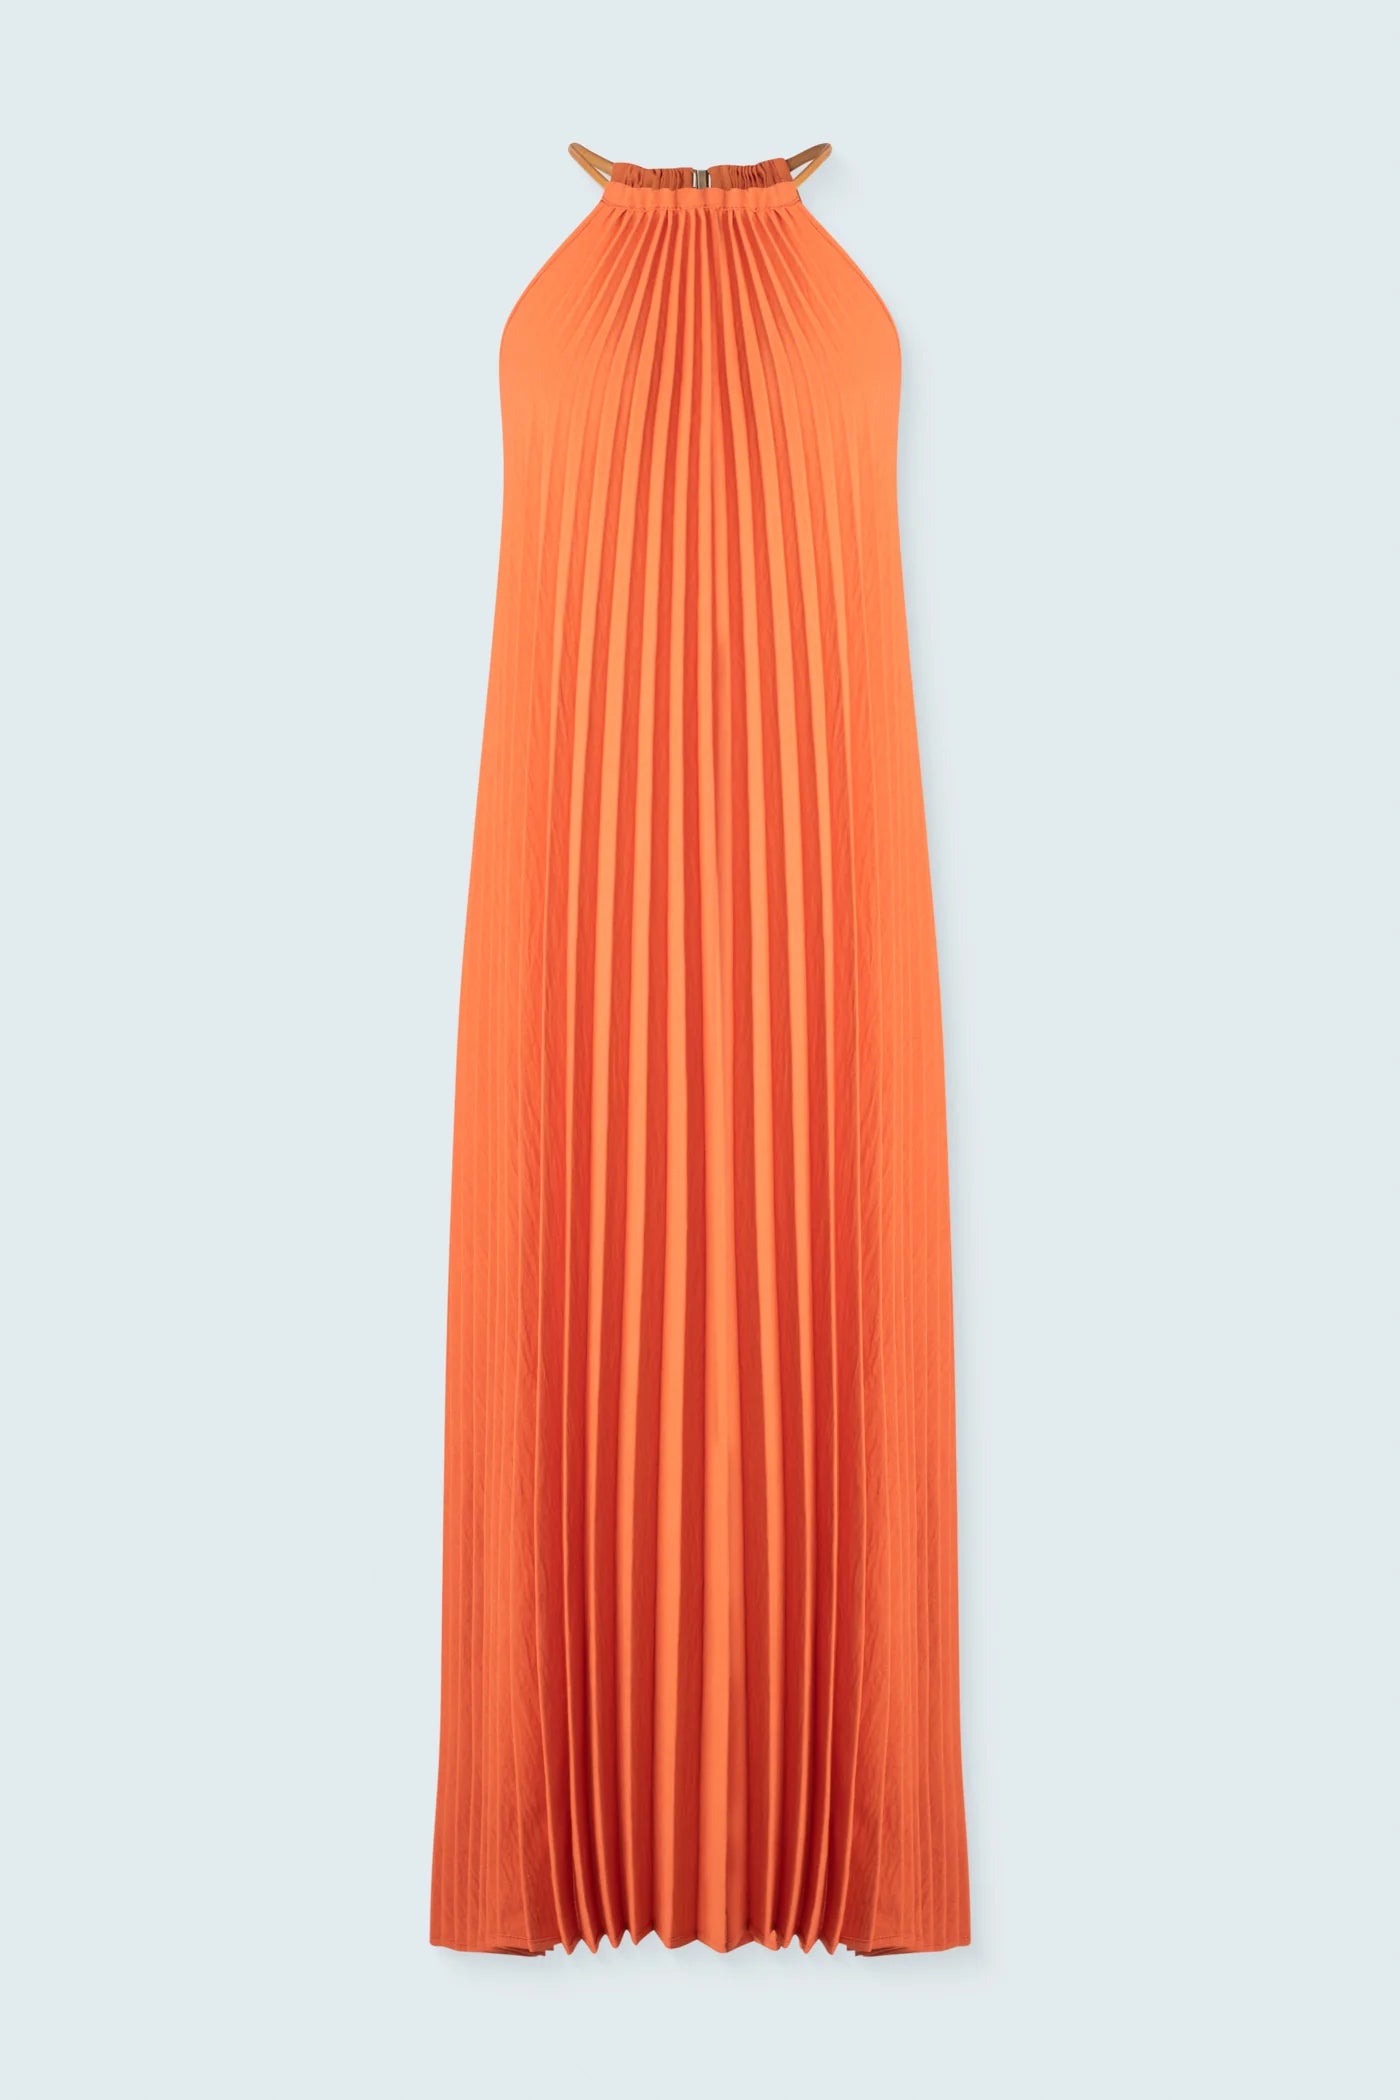 Halter Top Pleated Dress in Paprika